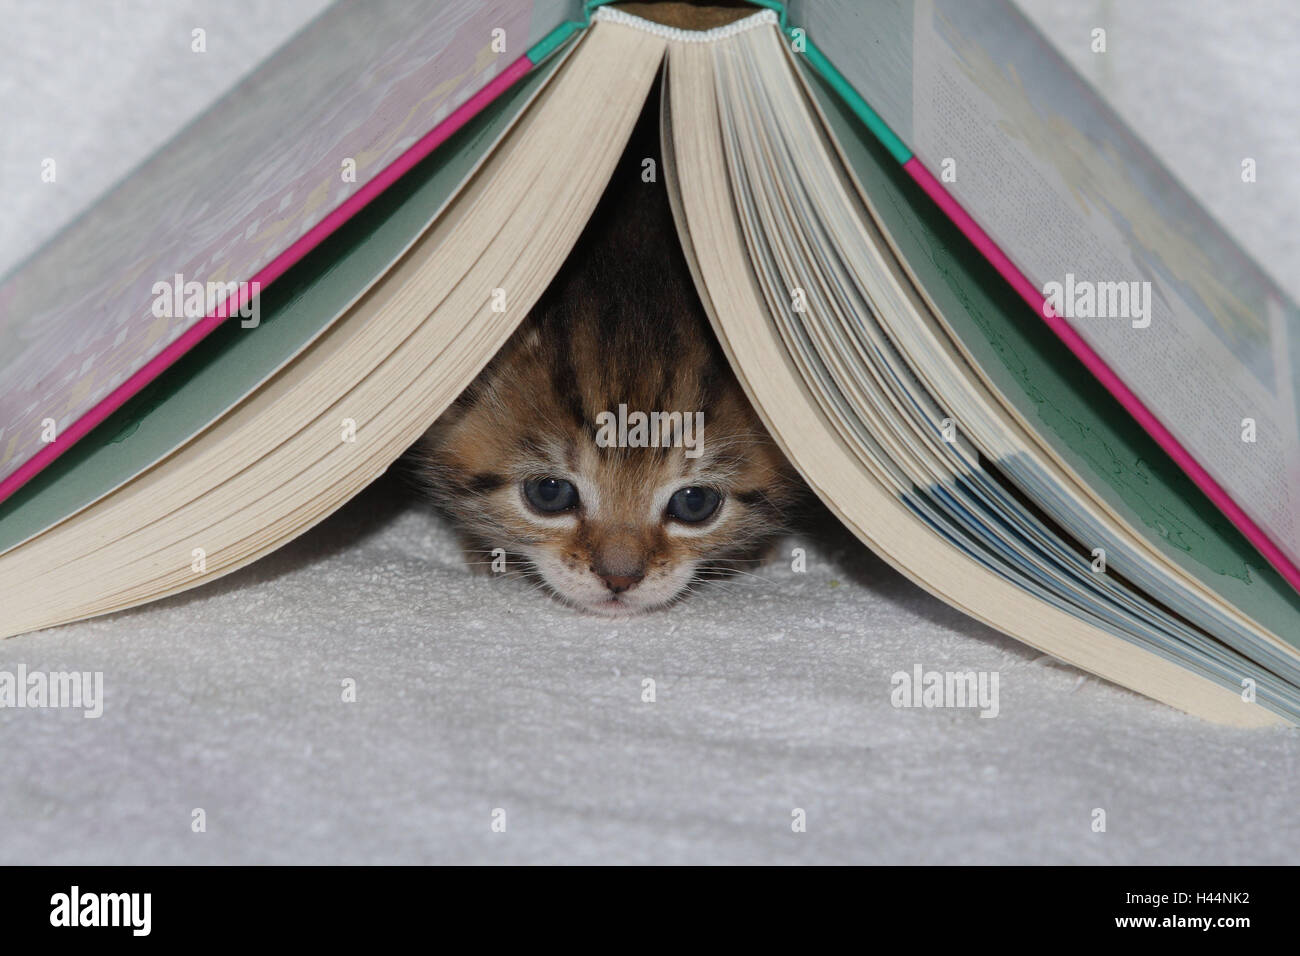 Plates, cat, young, hide, book, opened, bed, animals, mammals, pets, small cats, Felidae, domesticates, house cat, young animal, kitten, small, awkward, clumsy, creep, creep, curiosity, under, hiding place, play, sweetly, individually, all alone, striped, look, portrait, young animals, animal baby, inside, Stock Photo